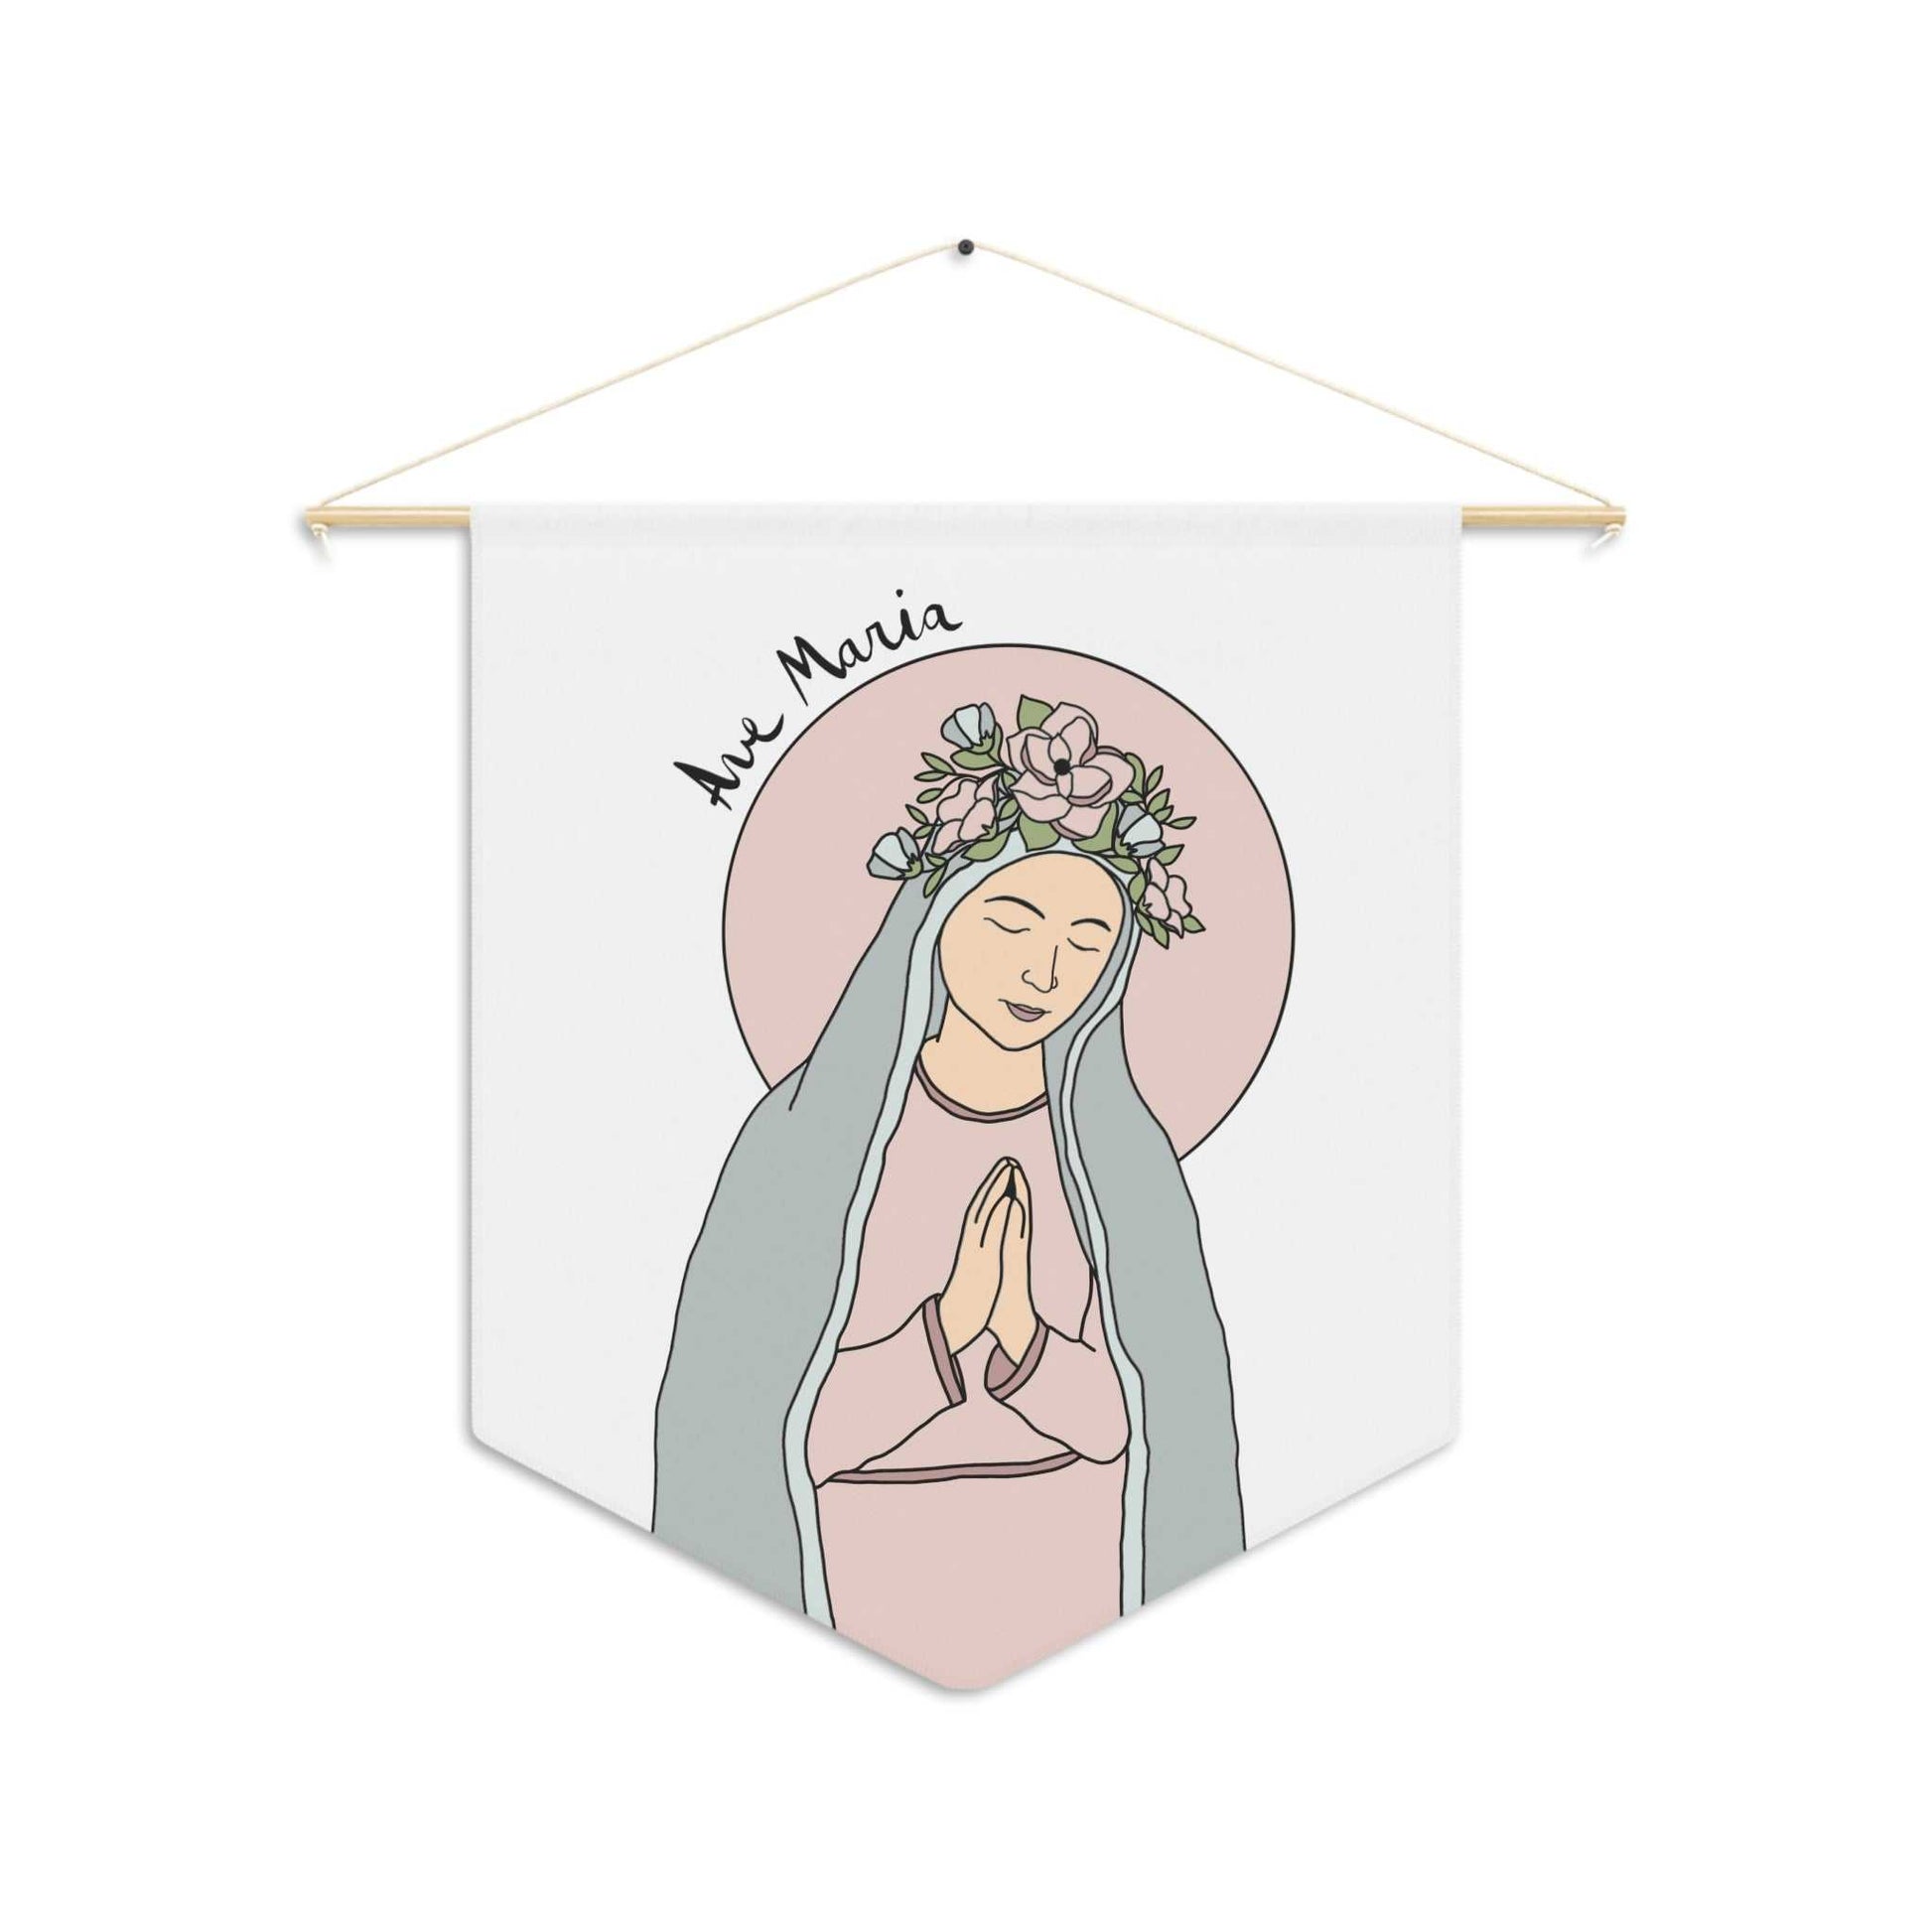 Our Lady of Fatima Pennant / Flag Violet Heart Studios